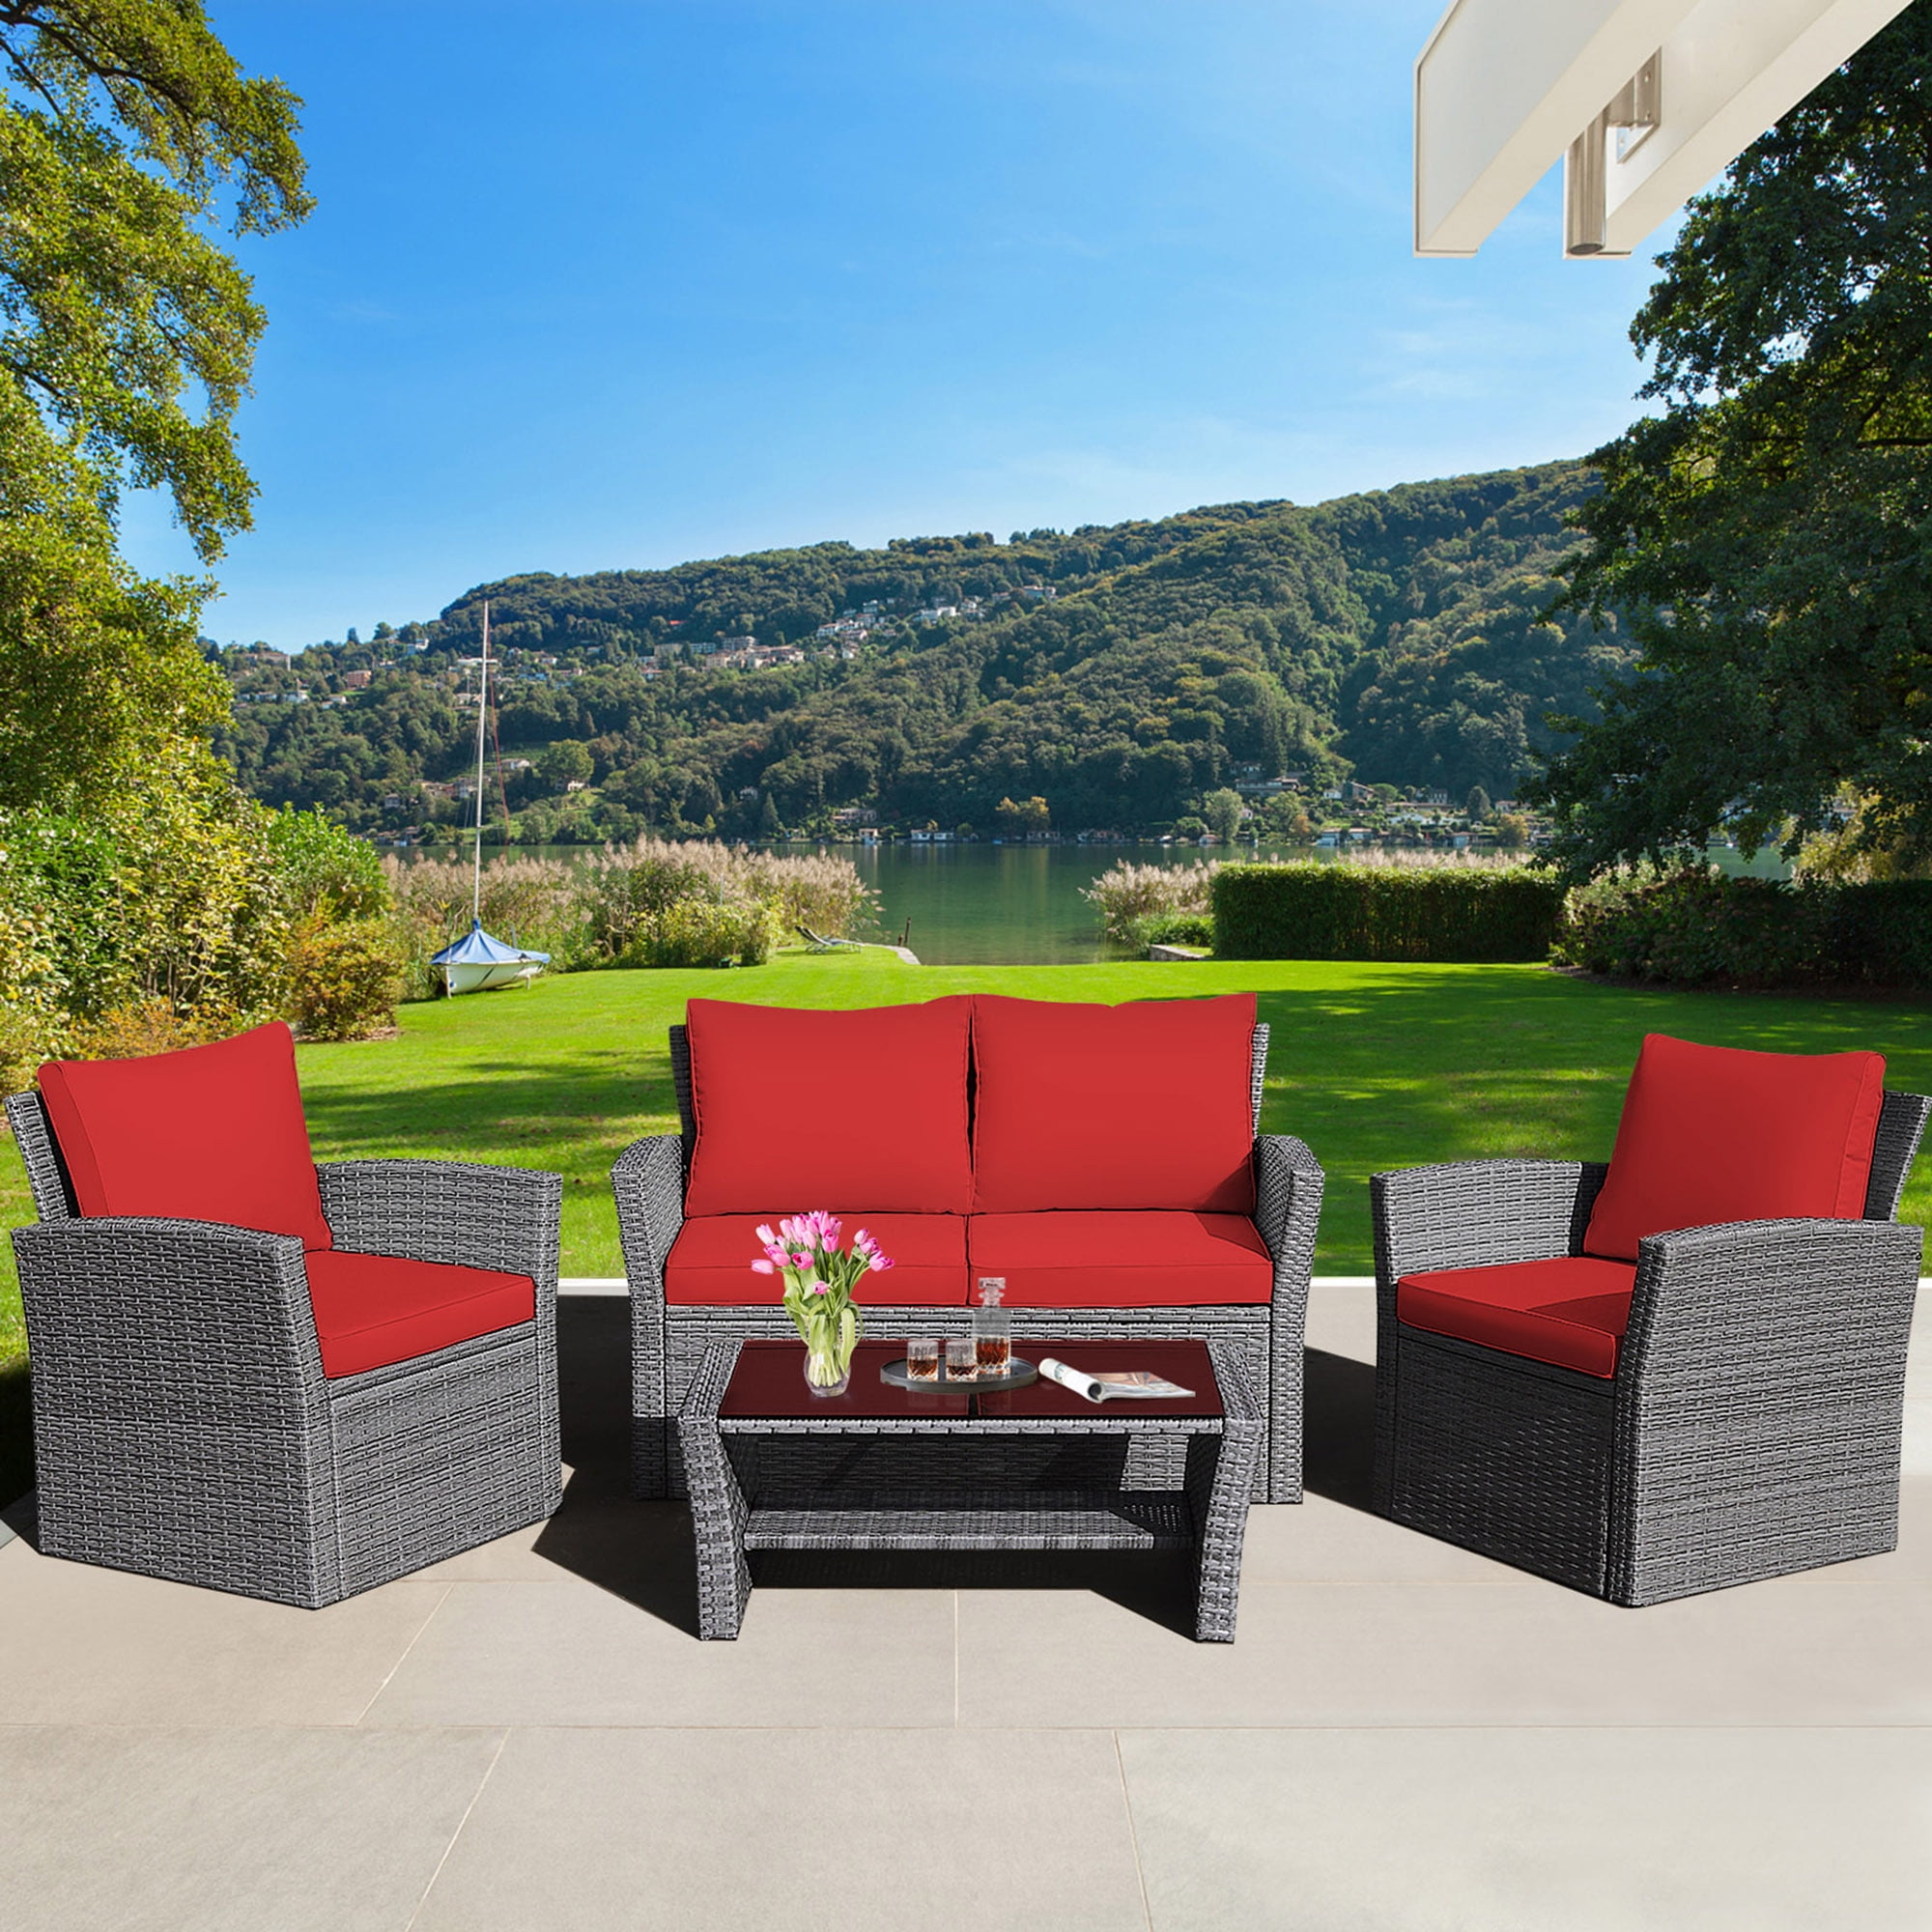 Gymax 4 Pieces Patio Rattan, Patio Furniture Sets Red Cushions